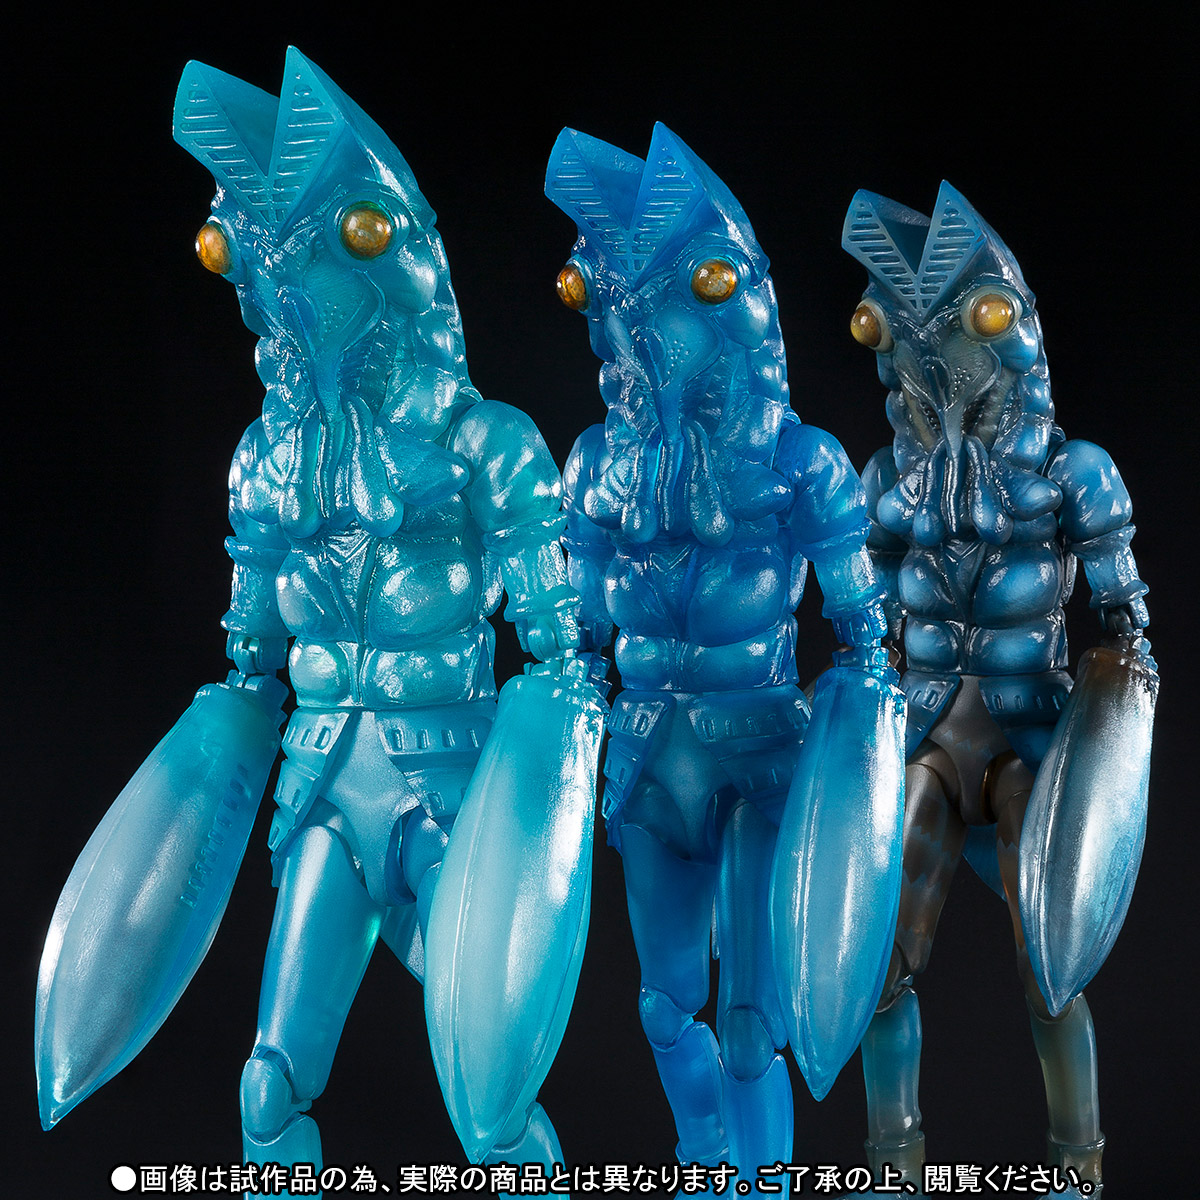 Sh Figuarts Alien Baltan Clone Set 3 Pack Official Images And Info